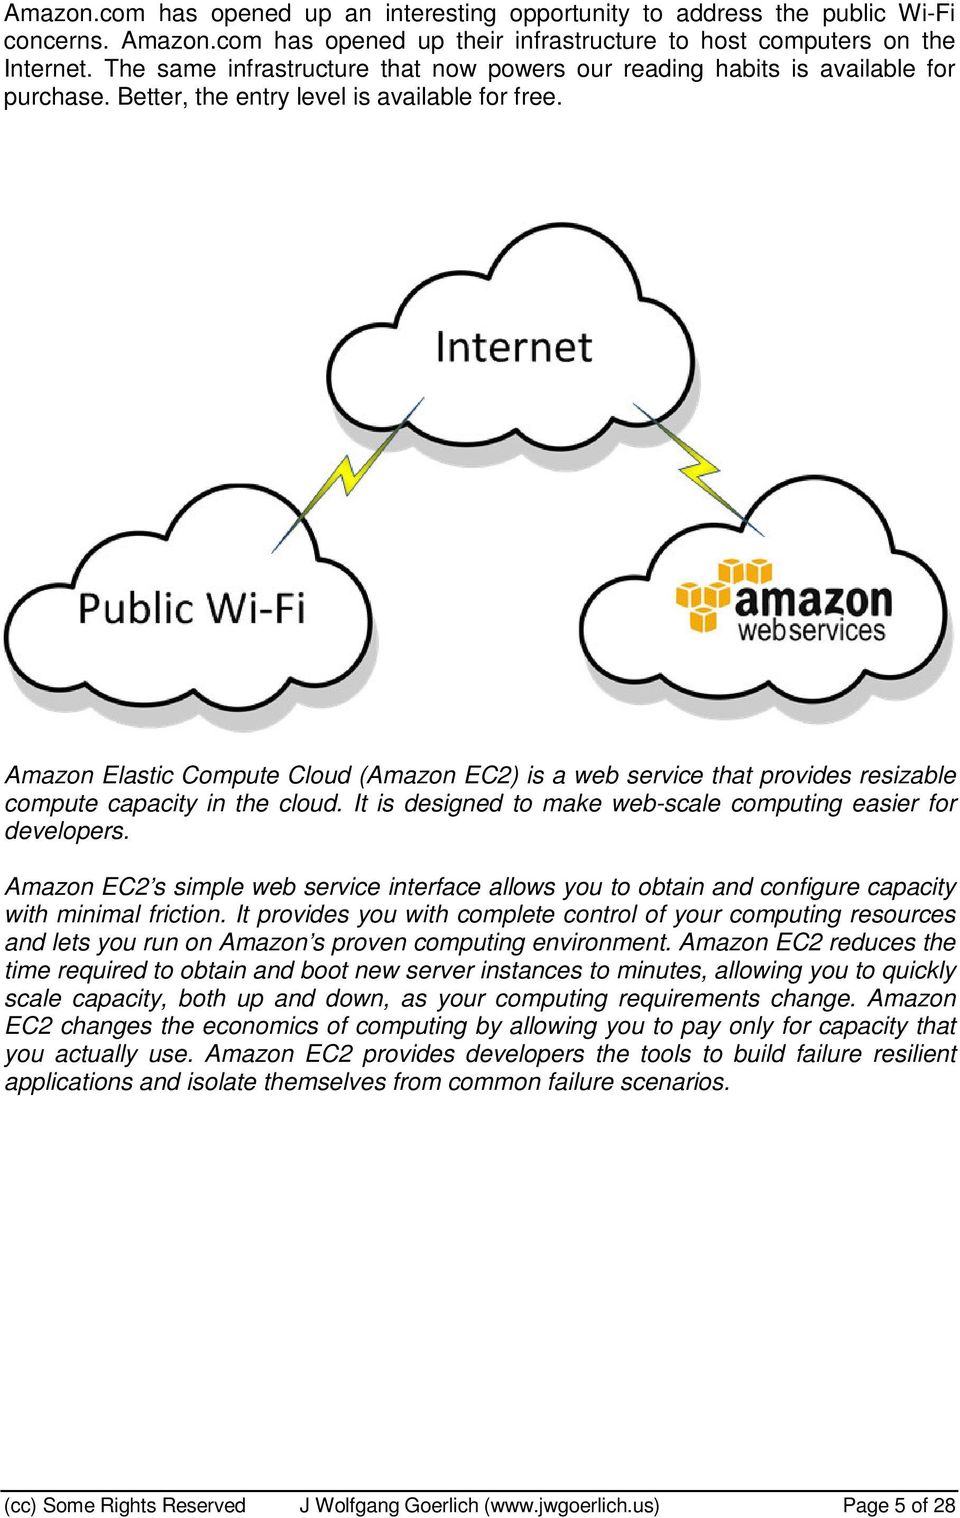 Amazon Elastic Compute Cloud (Amazon EC2) is a web service that provides resizable compute capacity in the cloud. It is designed to make web-scale computing easier for developers.